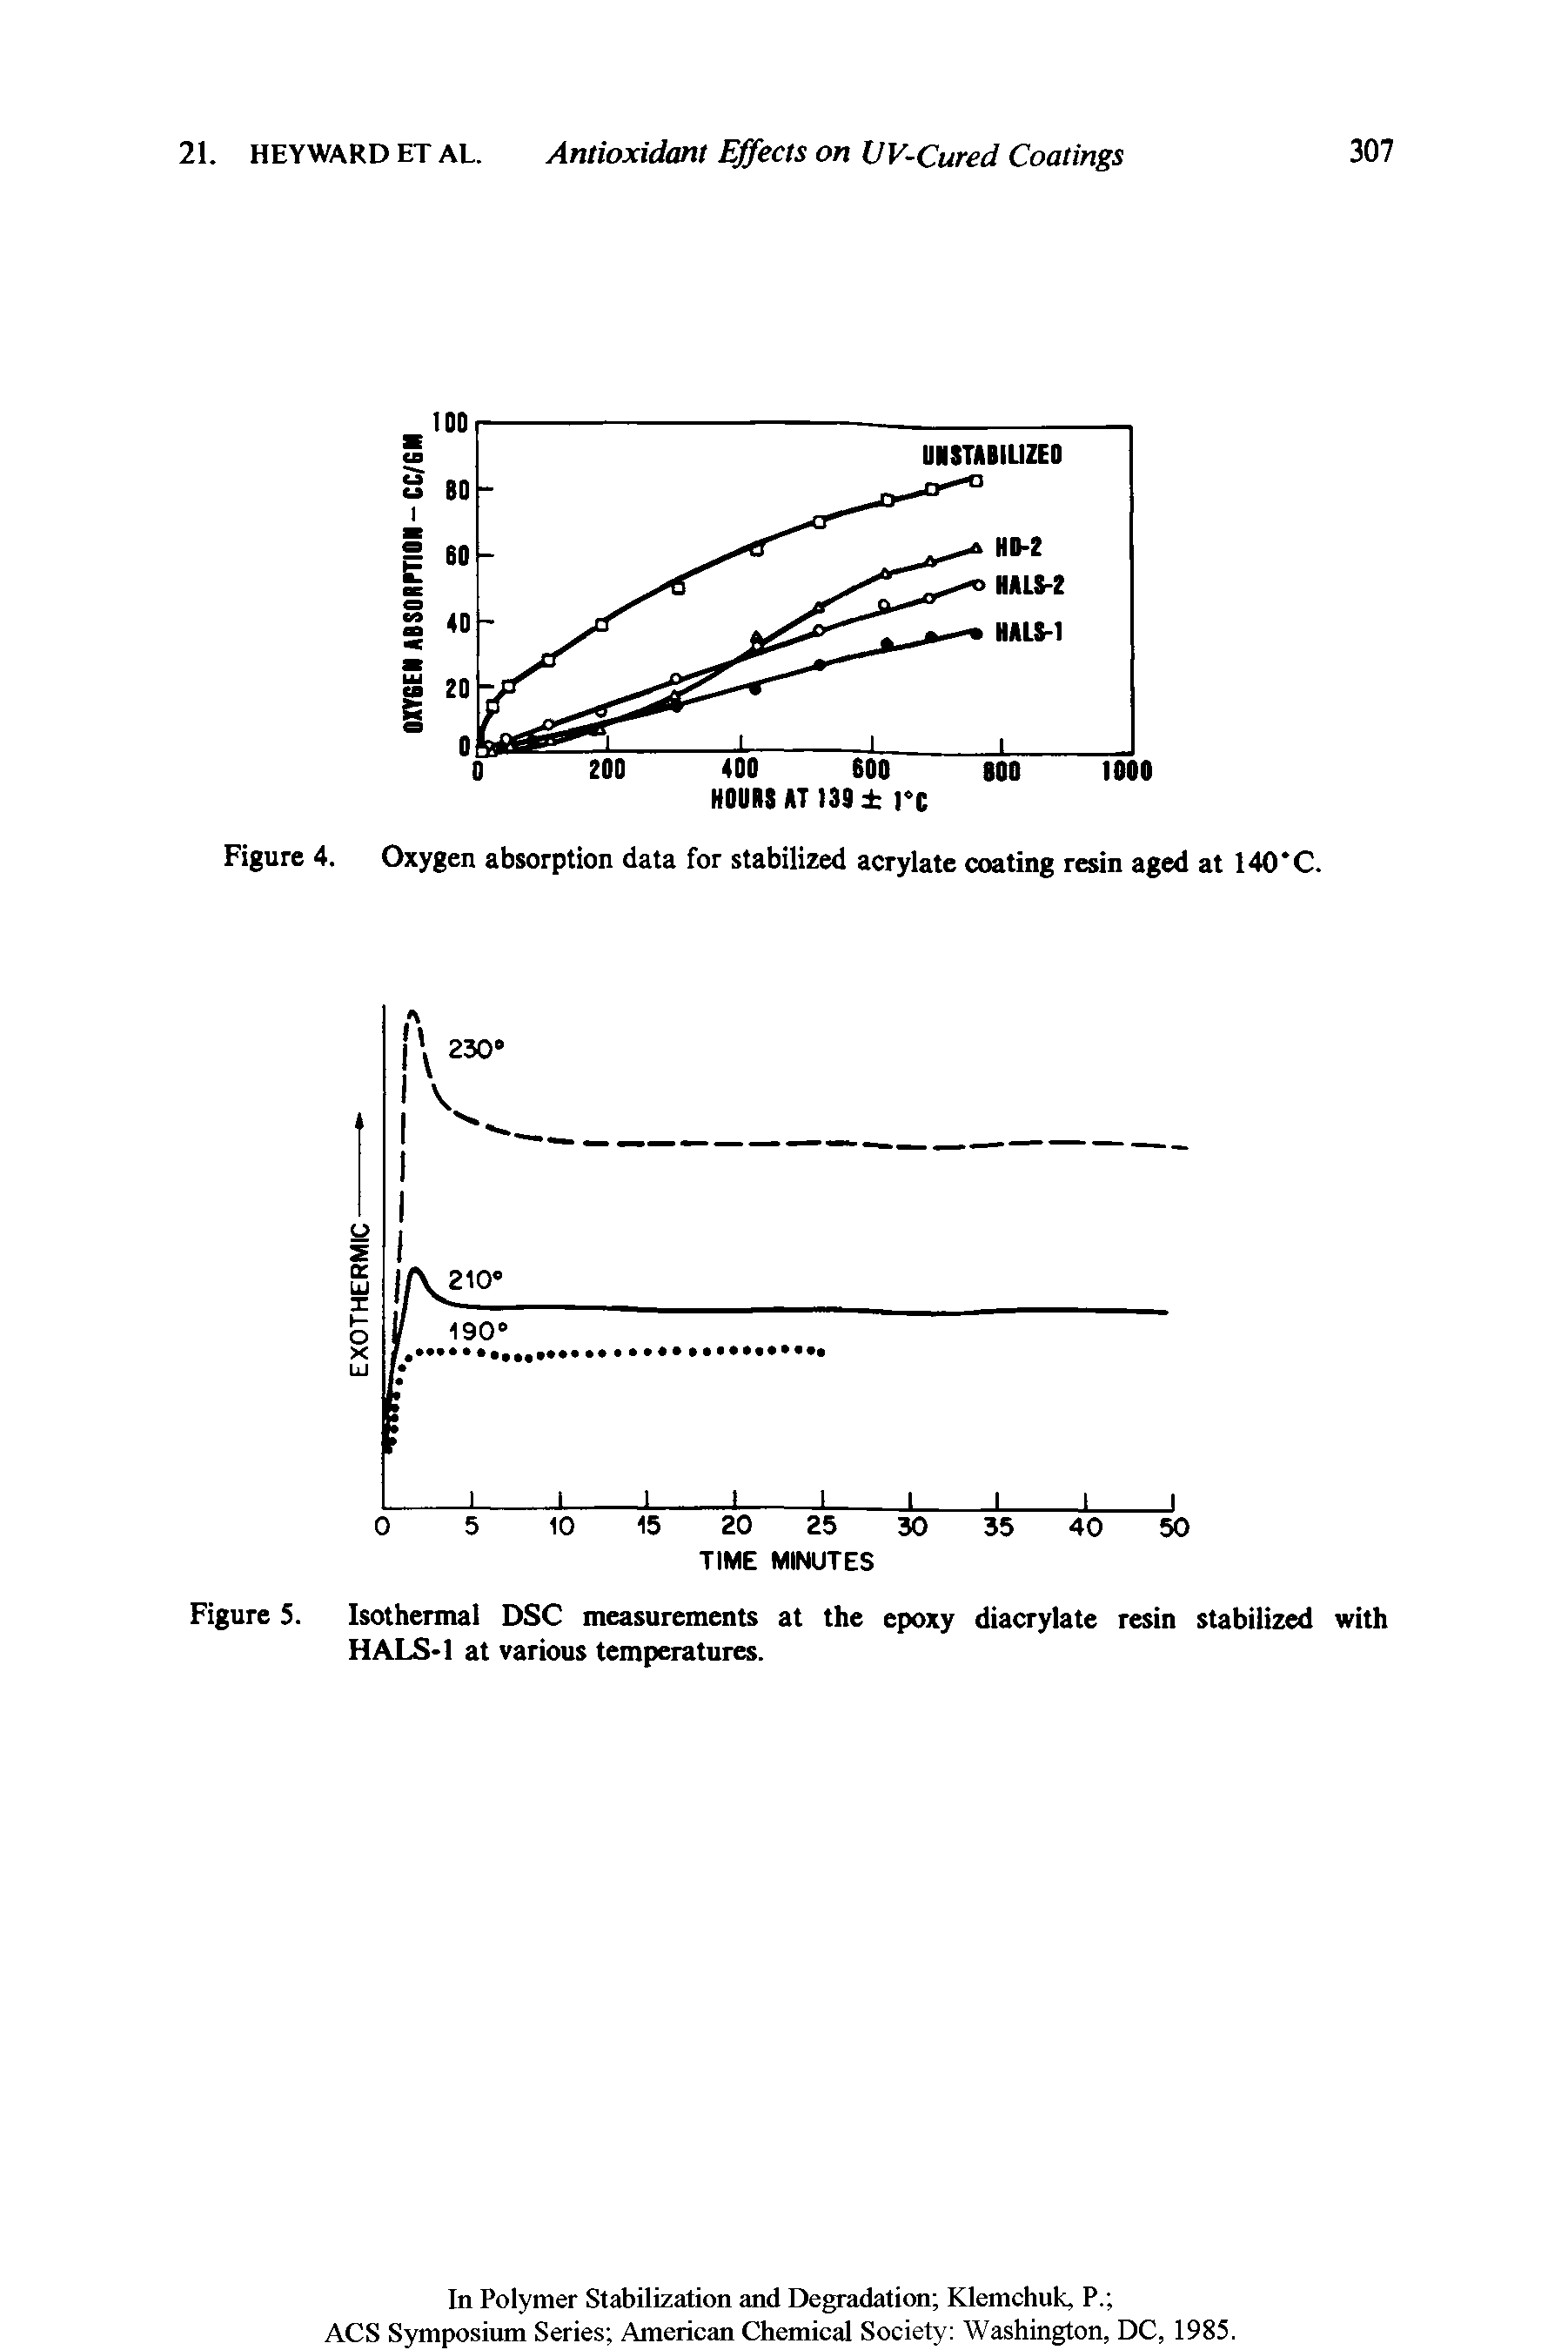 Figure 4. Oxygen absorption data for stabilized acrylate coating resin aged at 140 C.